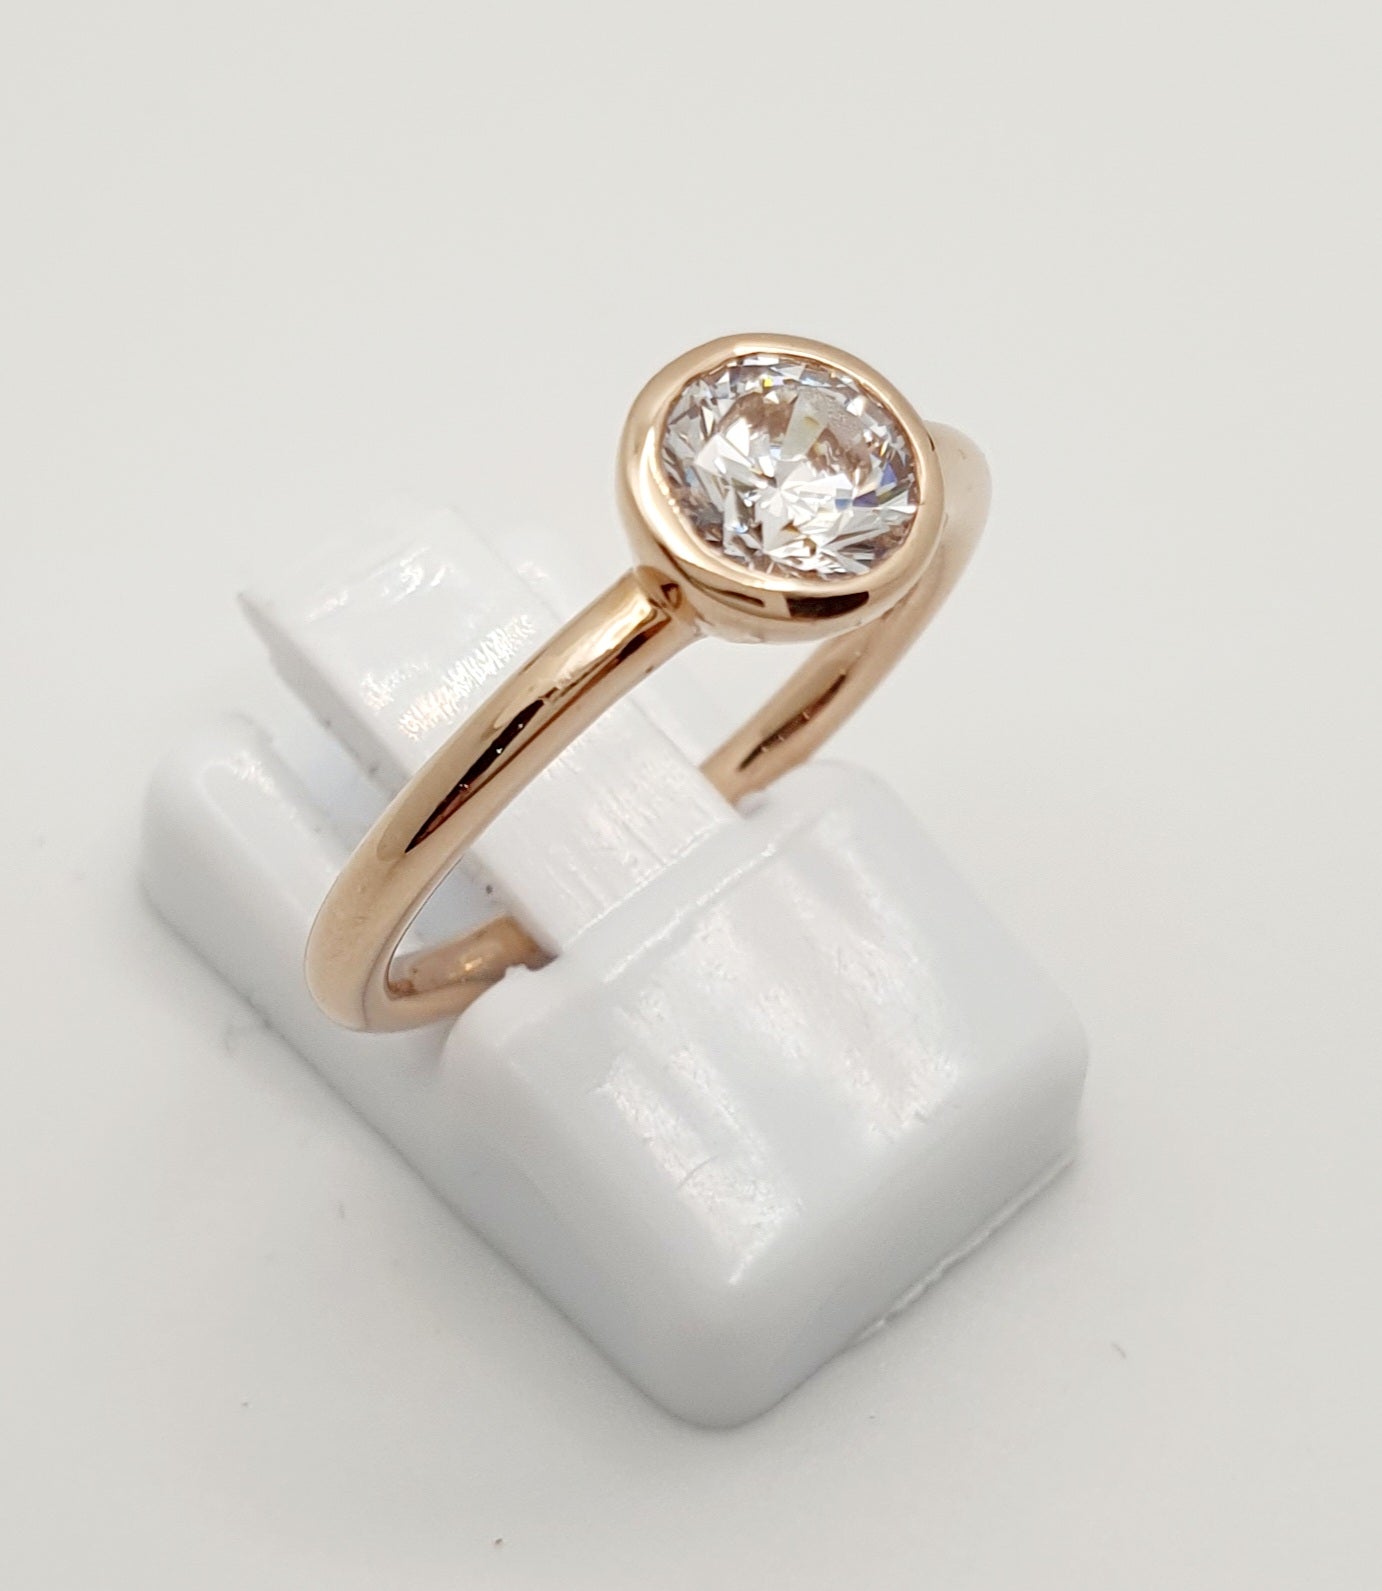 9ct Rose Gold CZ Solitaire Ring